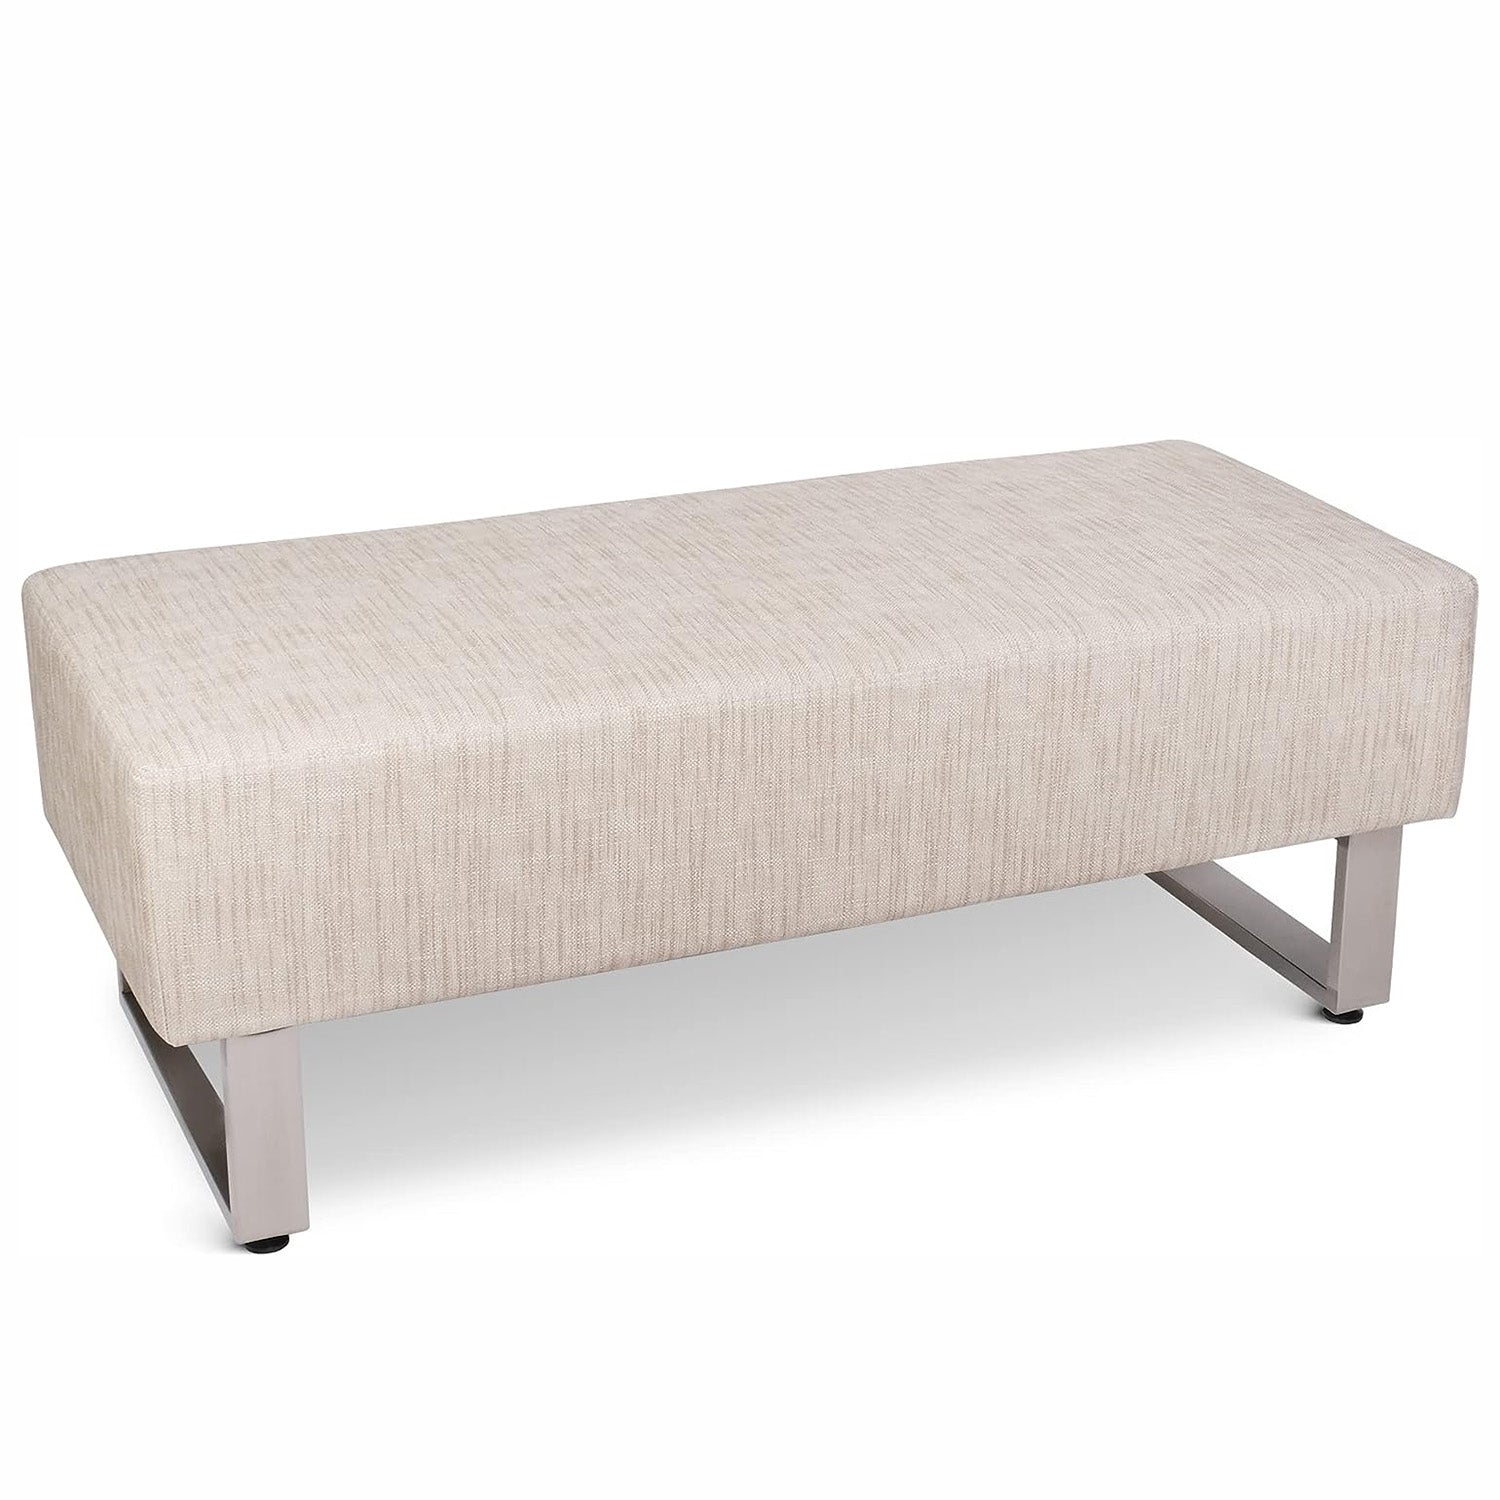 47"L Modern PU Leather Dining Room Bench Upholstered Padded Seat, Beige